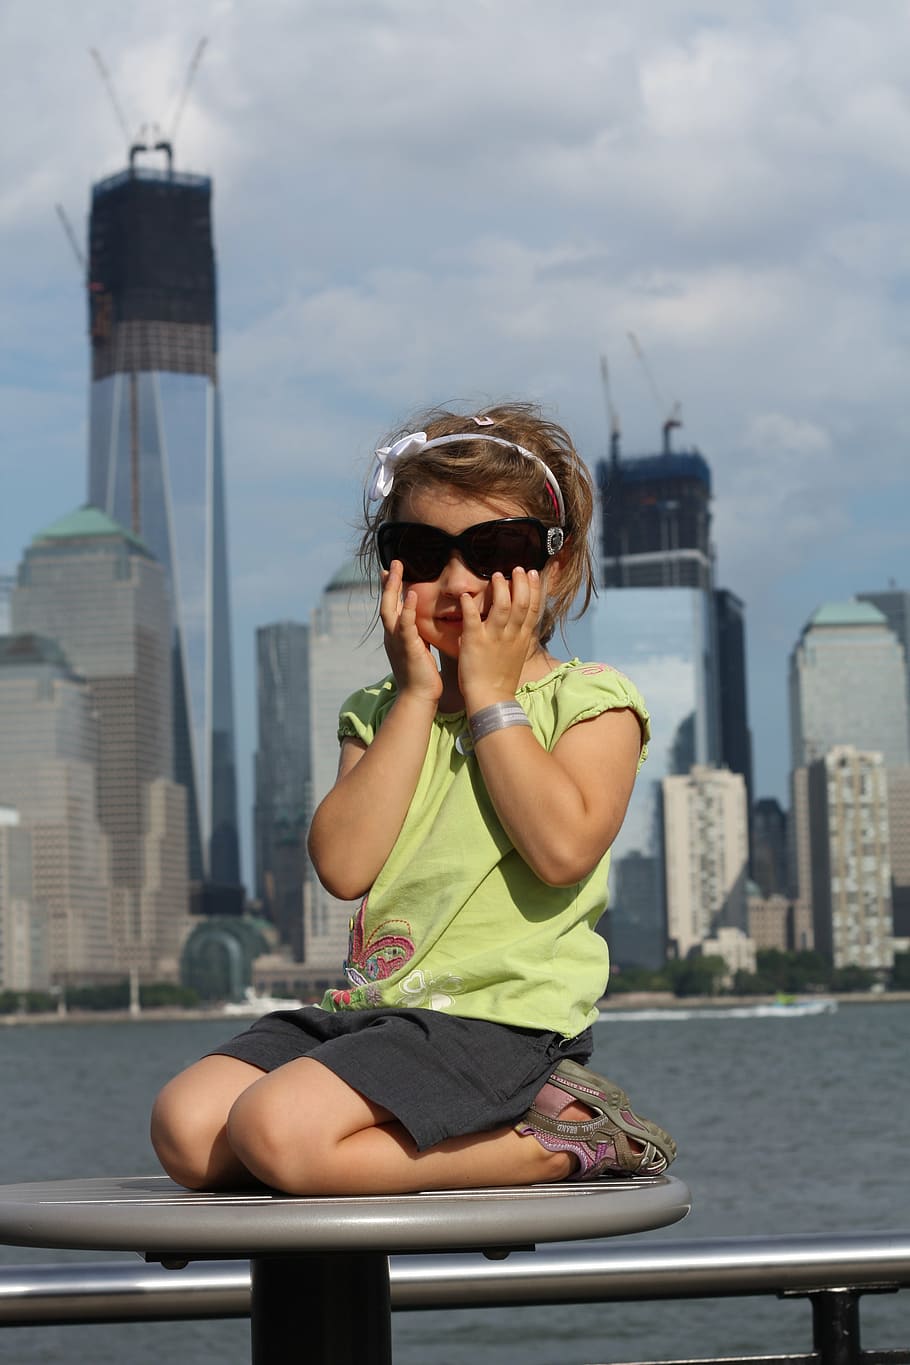 the little girl, new york, glasses, the construction of the wtc, child, a child presenting with glasses, city, sunglasses, architecture, built structure